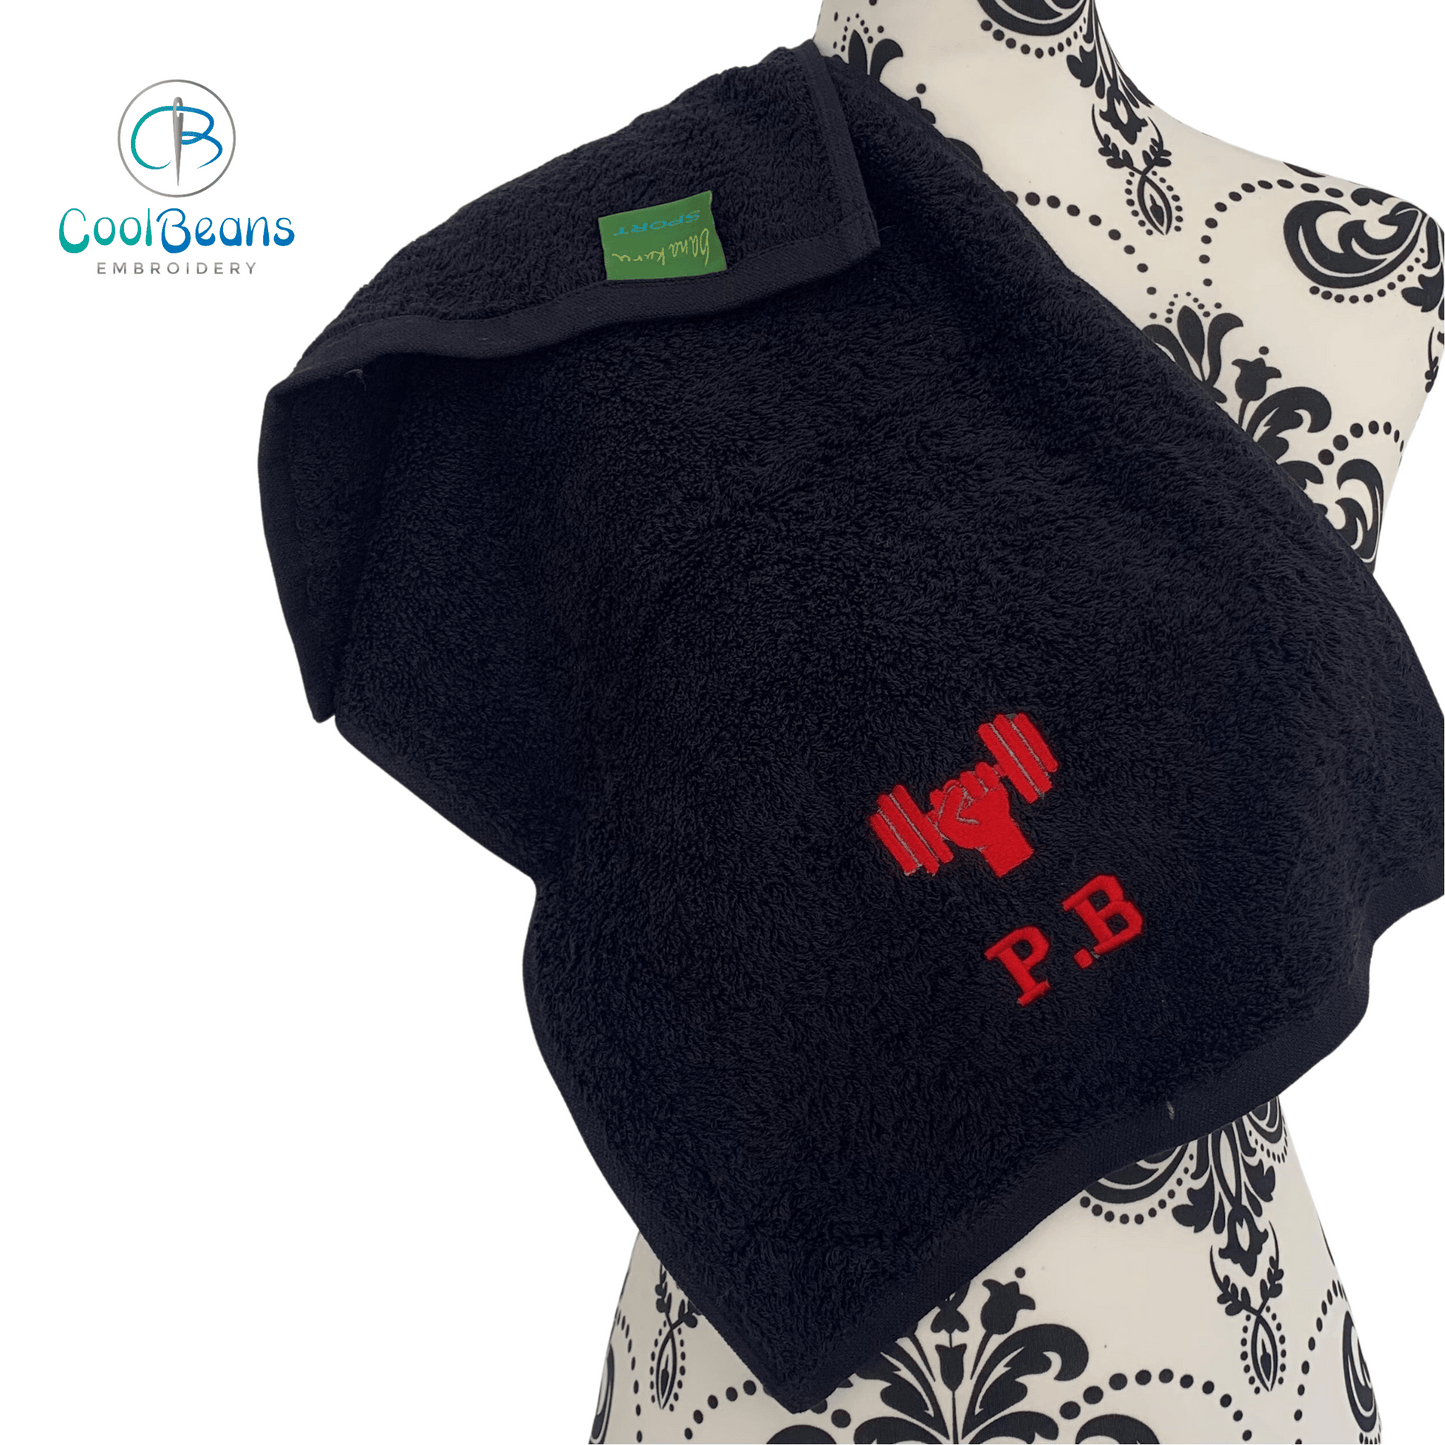 Gym Weights Pump Gym Towel - Personalised - Cool Beans Embroidery & Personalisation